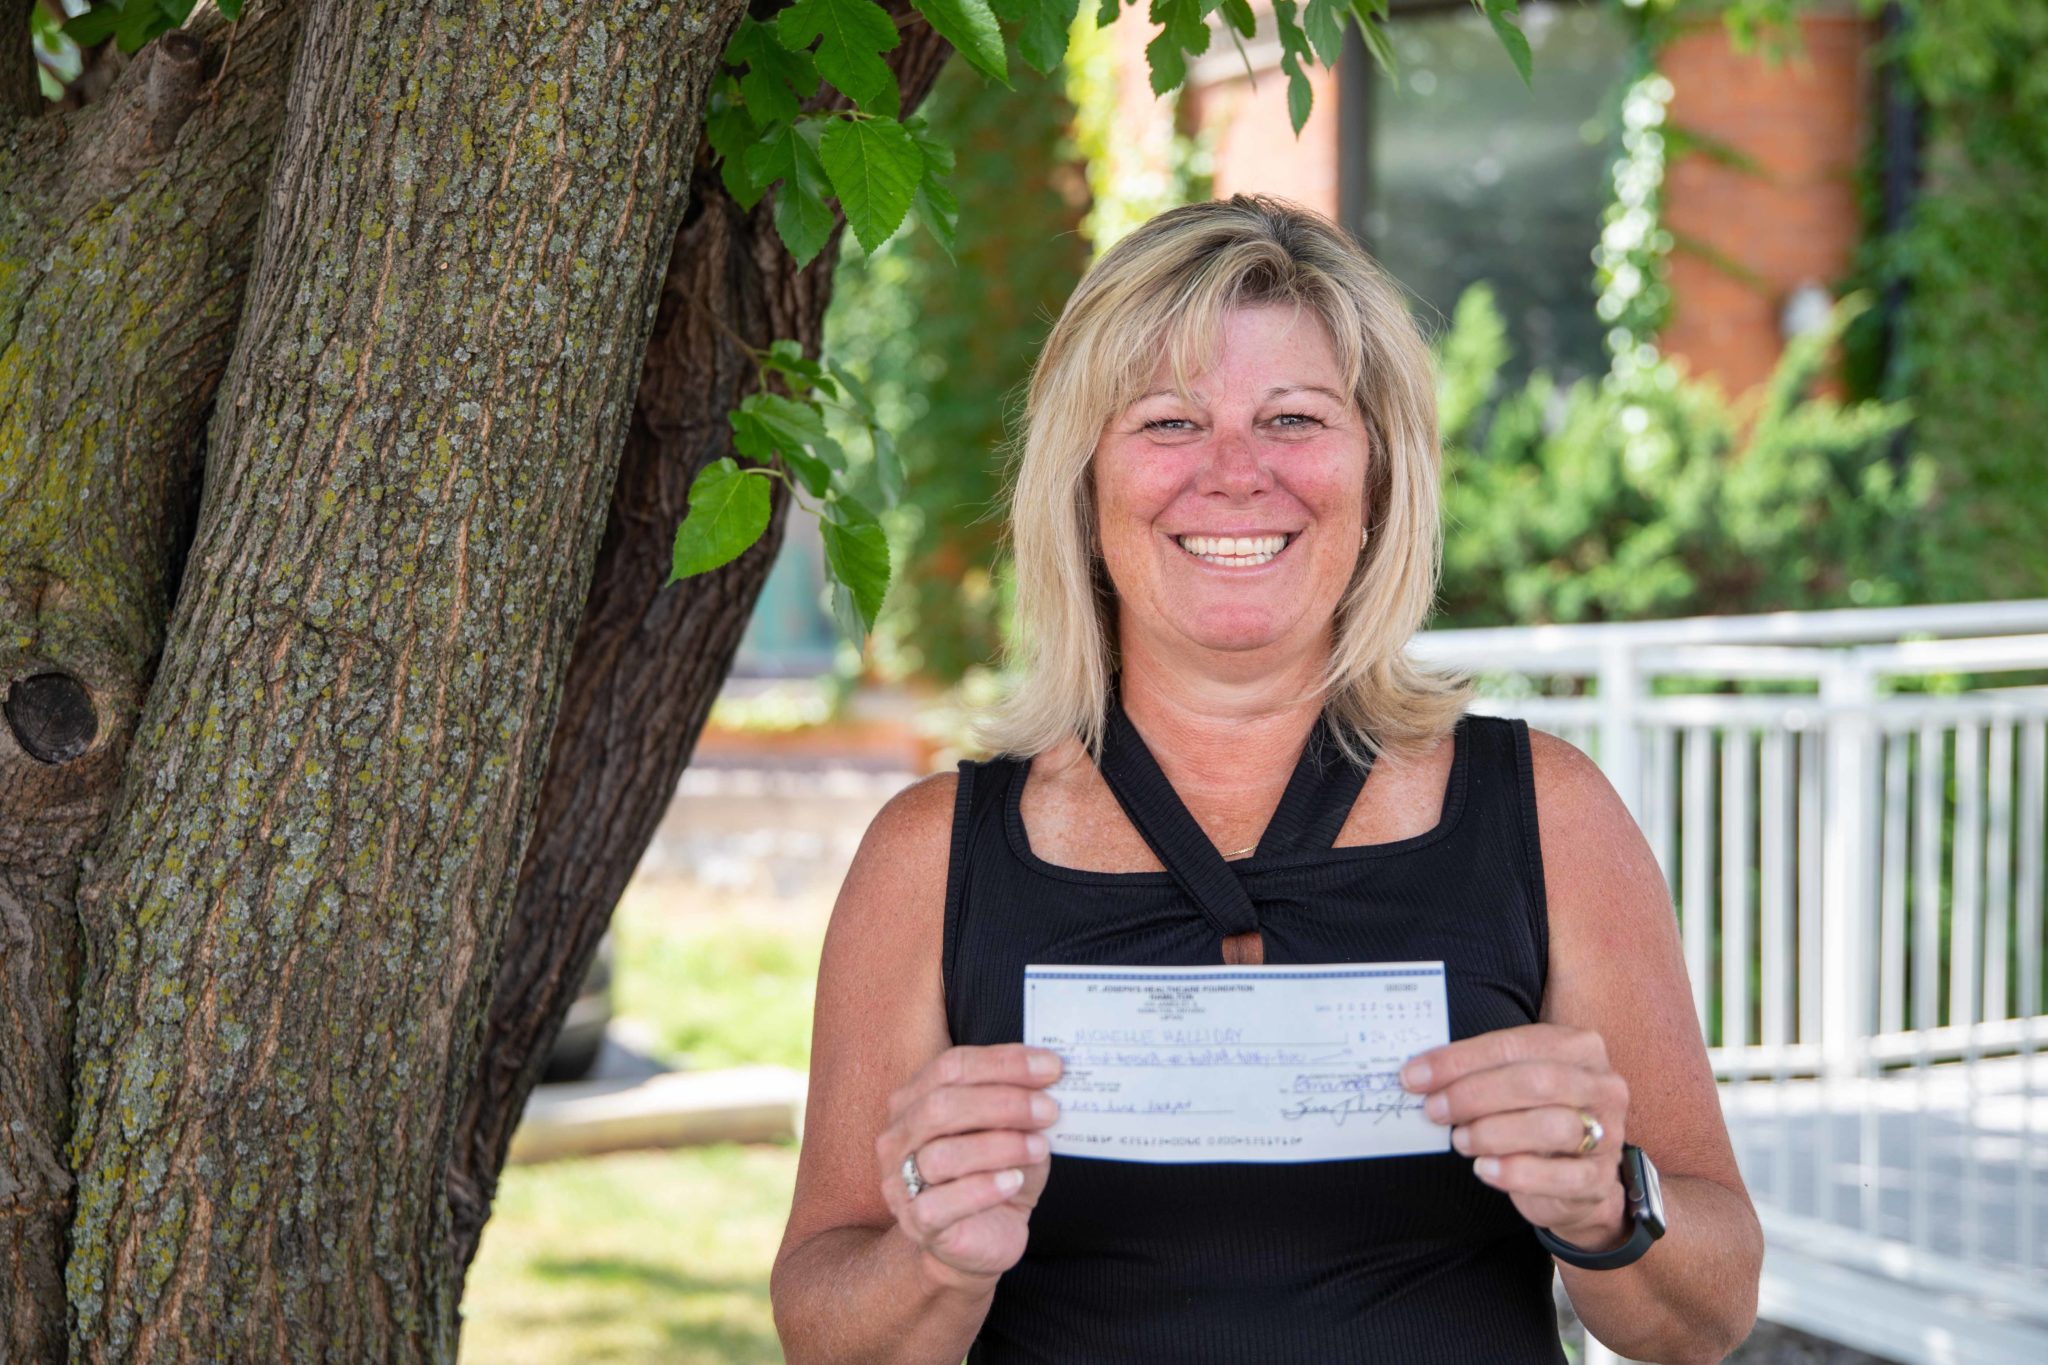 St. Joe's June Jackpot lottery winner, Michelle H., is photographed outdoors next to a large tree. She smiles while holding up her winning cheque.